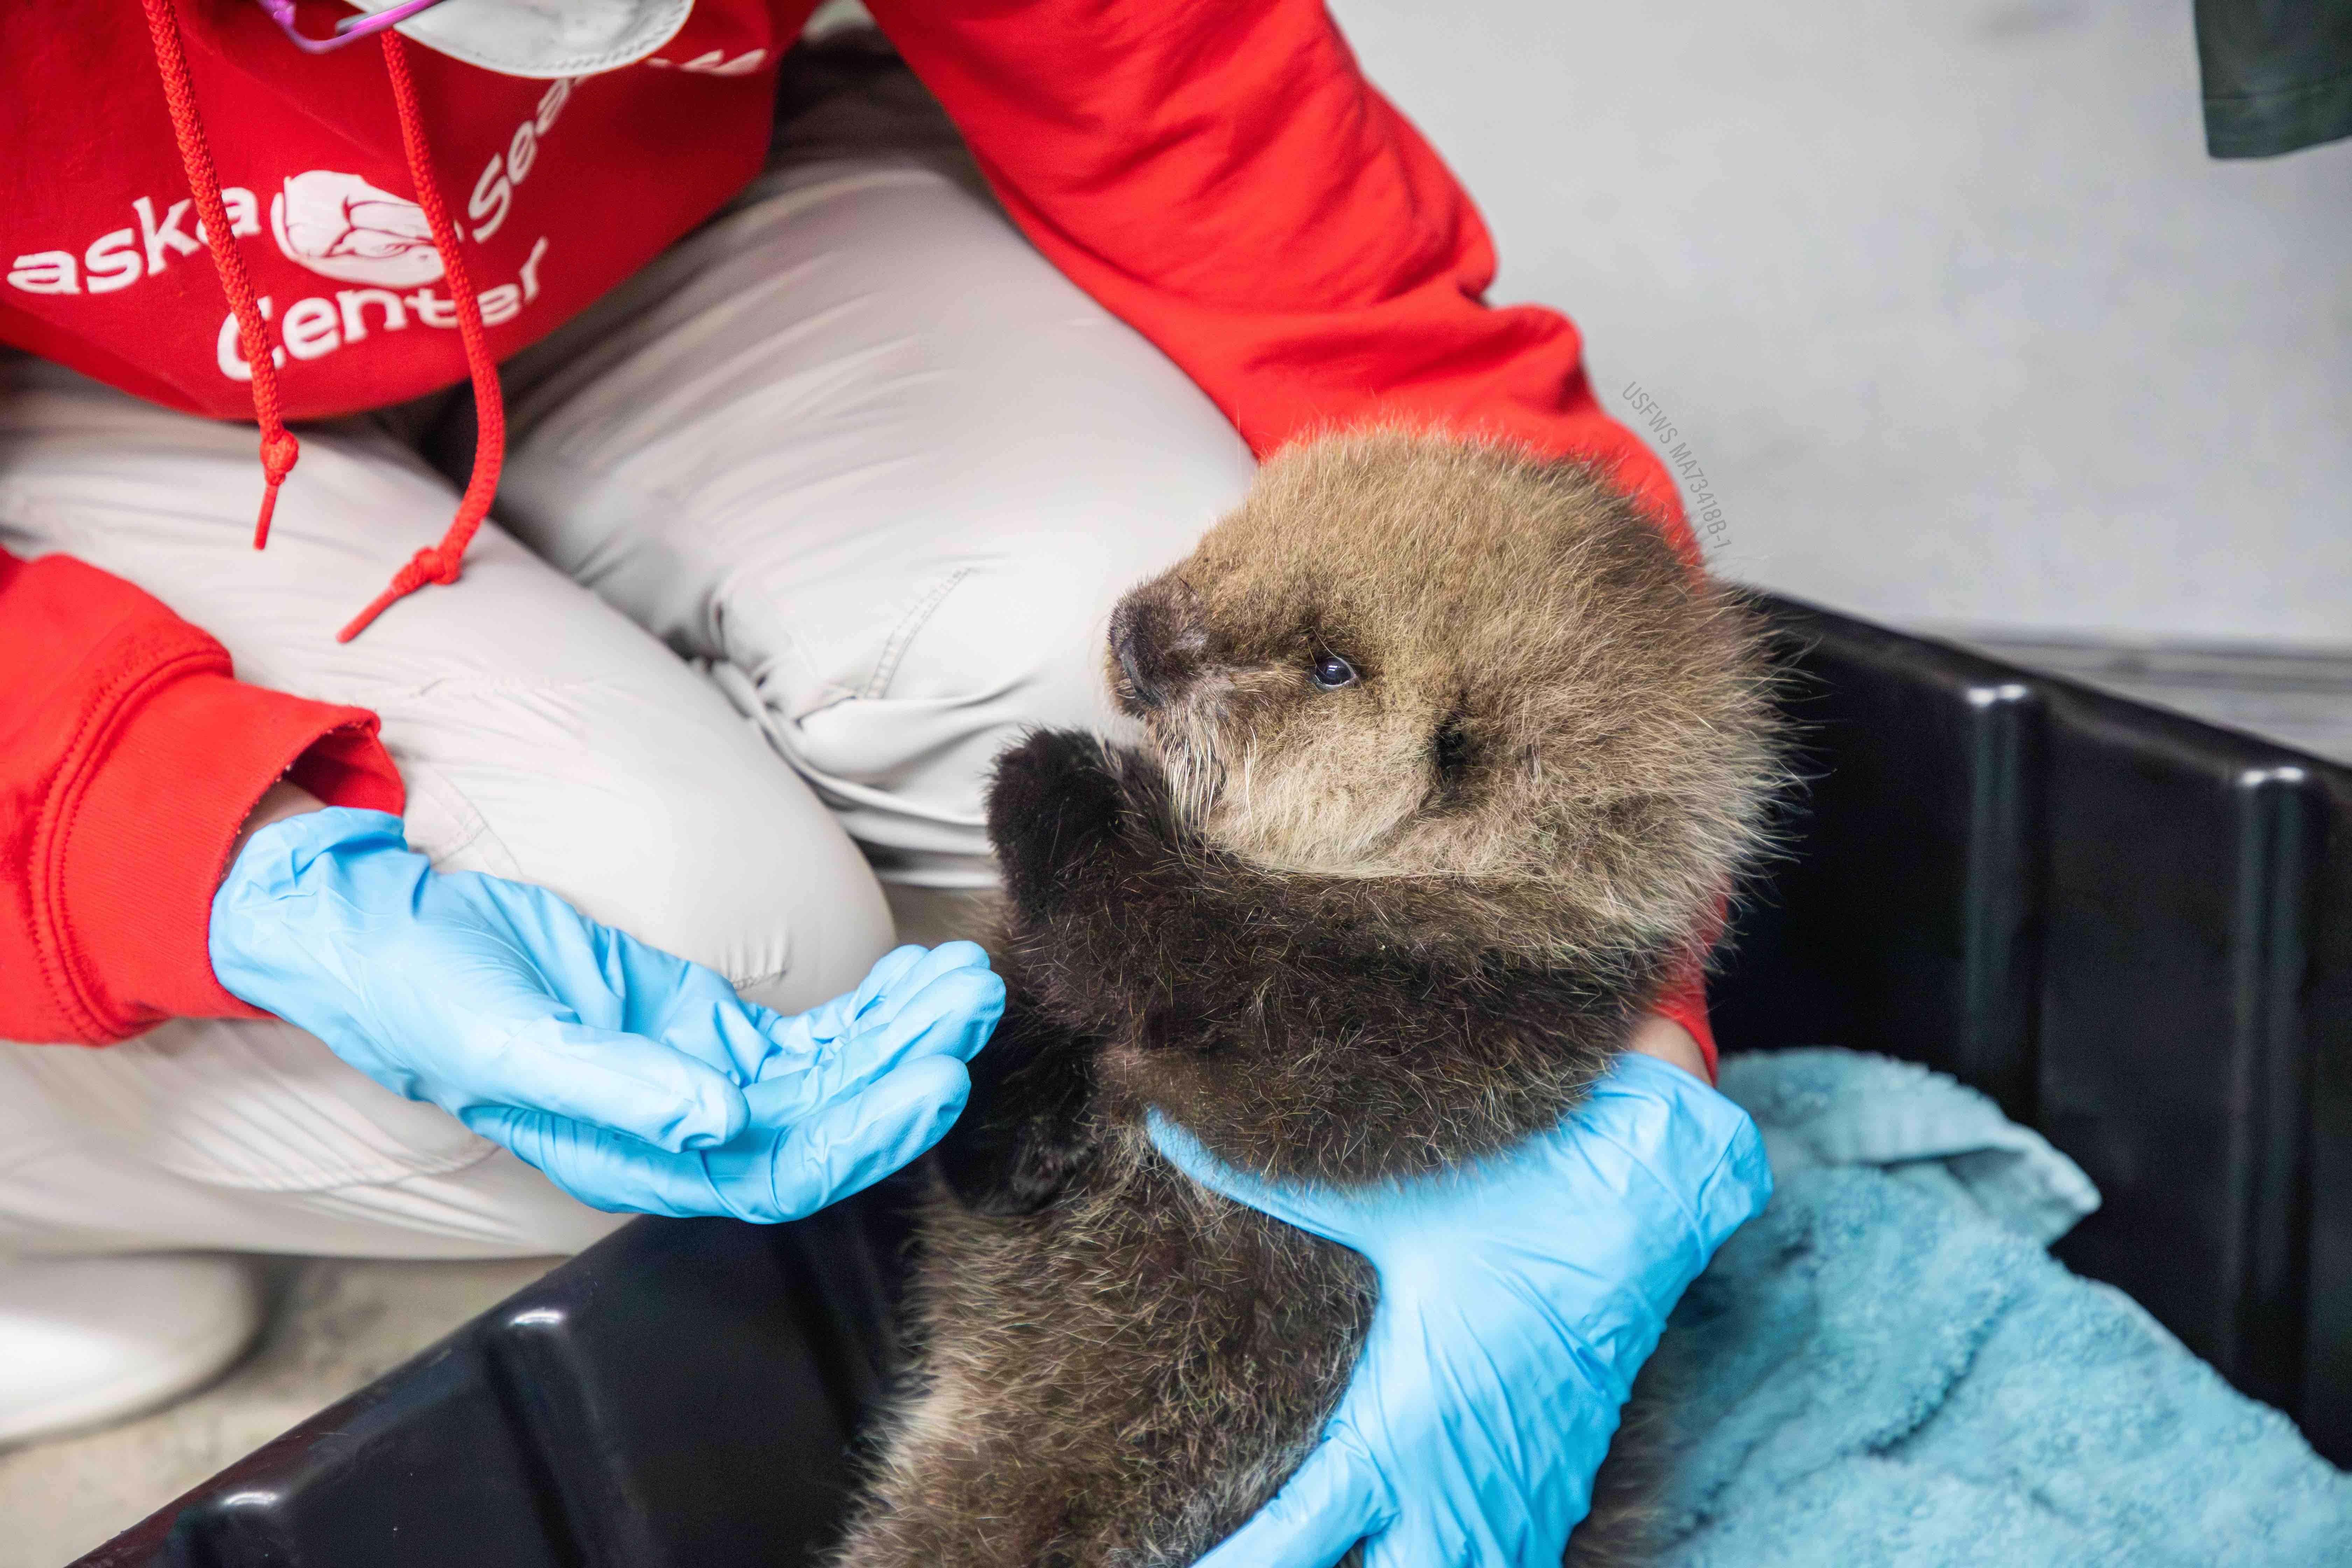 Alaska SeaLife Center rescued the otter pup from a remote coastal town. (Courtesy Alaska SeaLife Center)